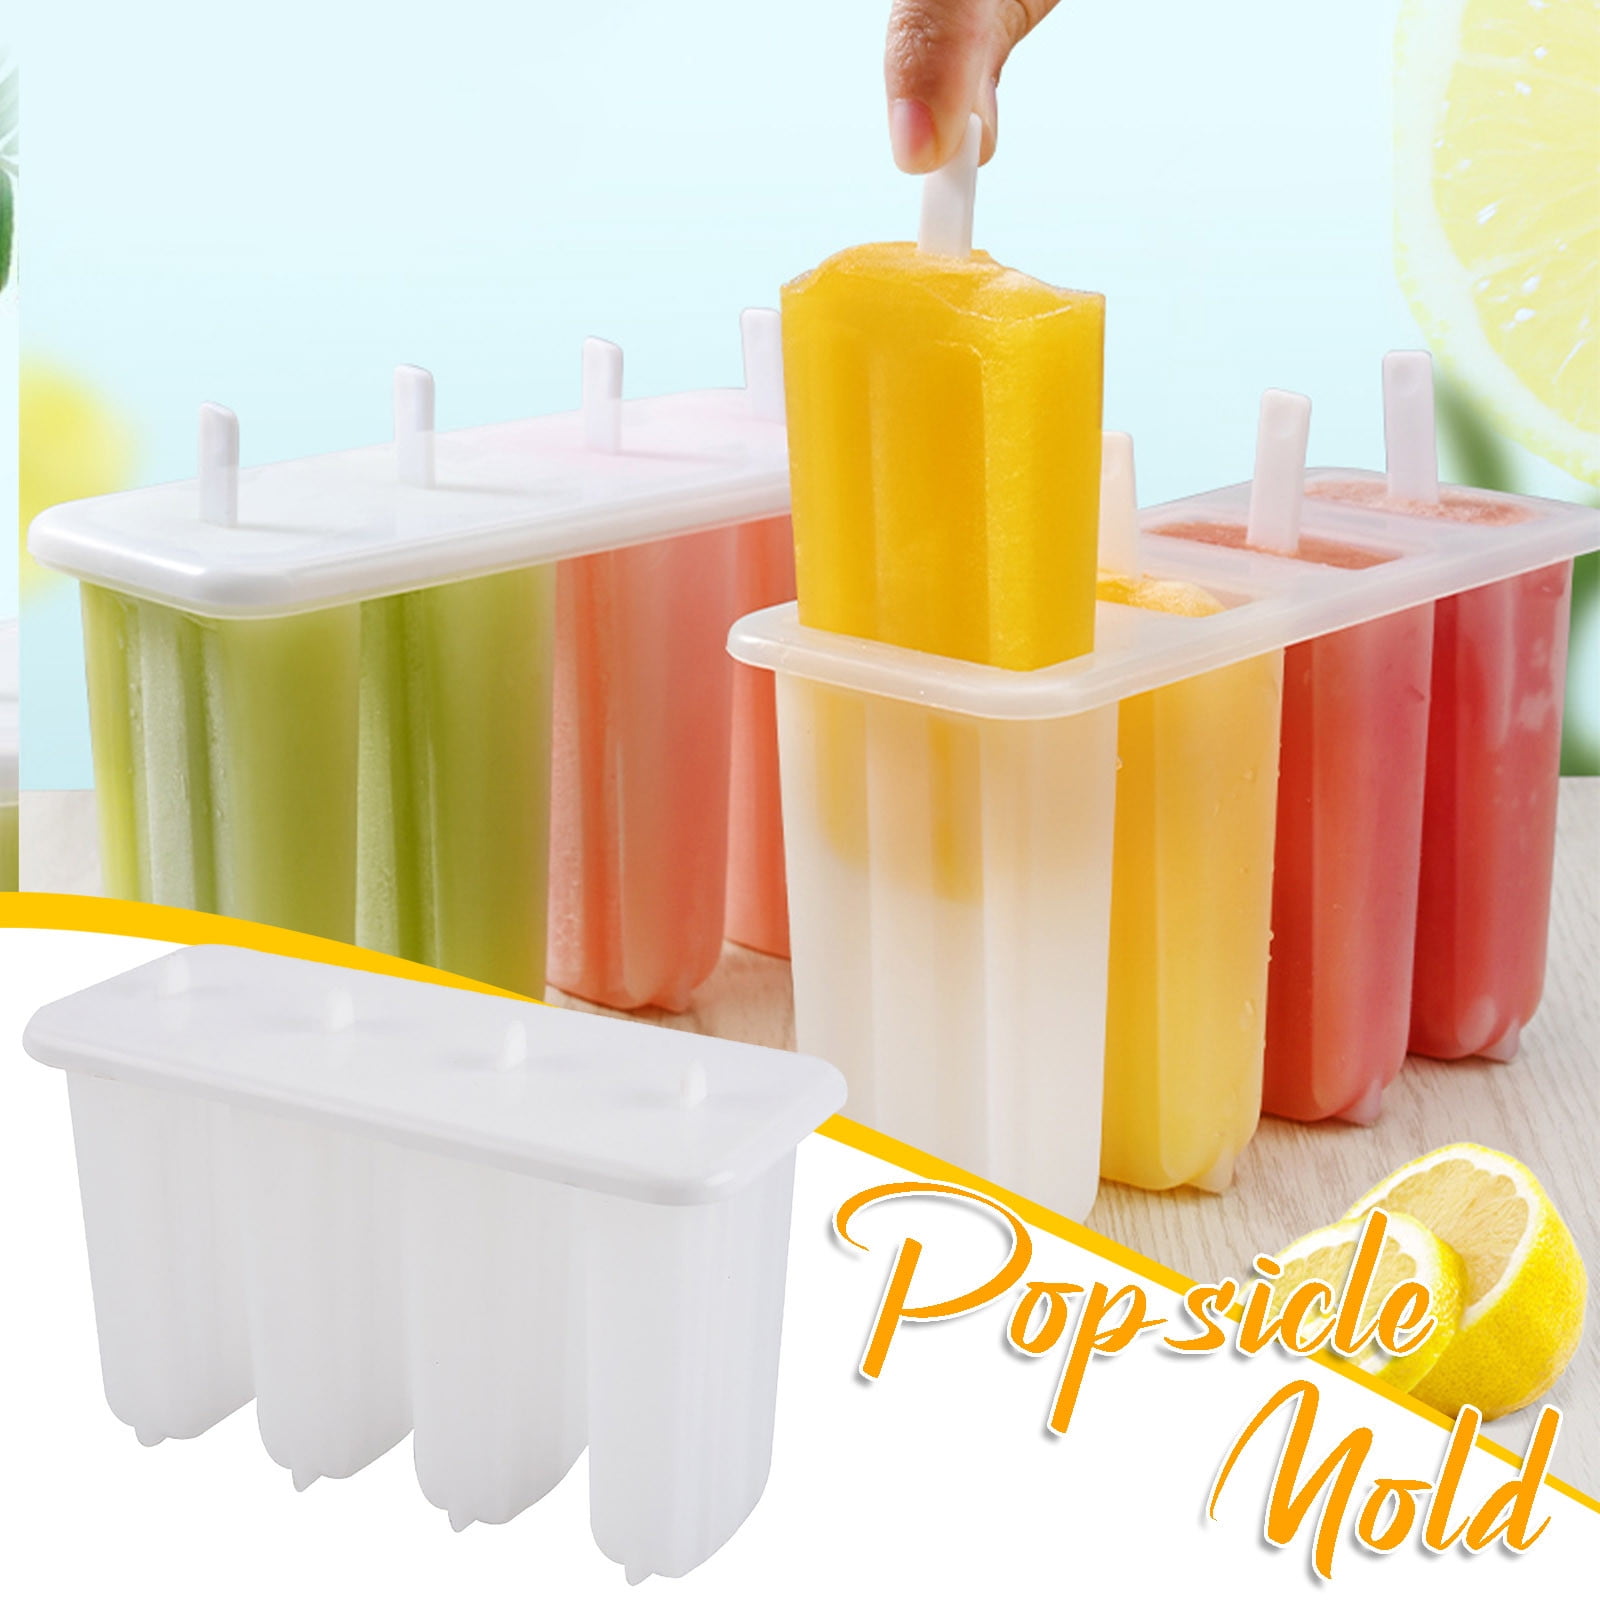 Zoku Quick Pop Maker and Storage Case for Popsicles